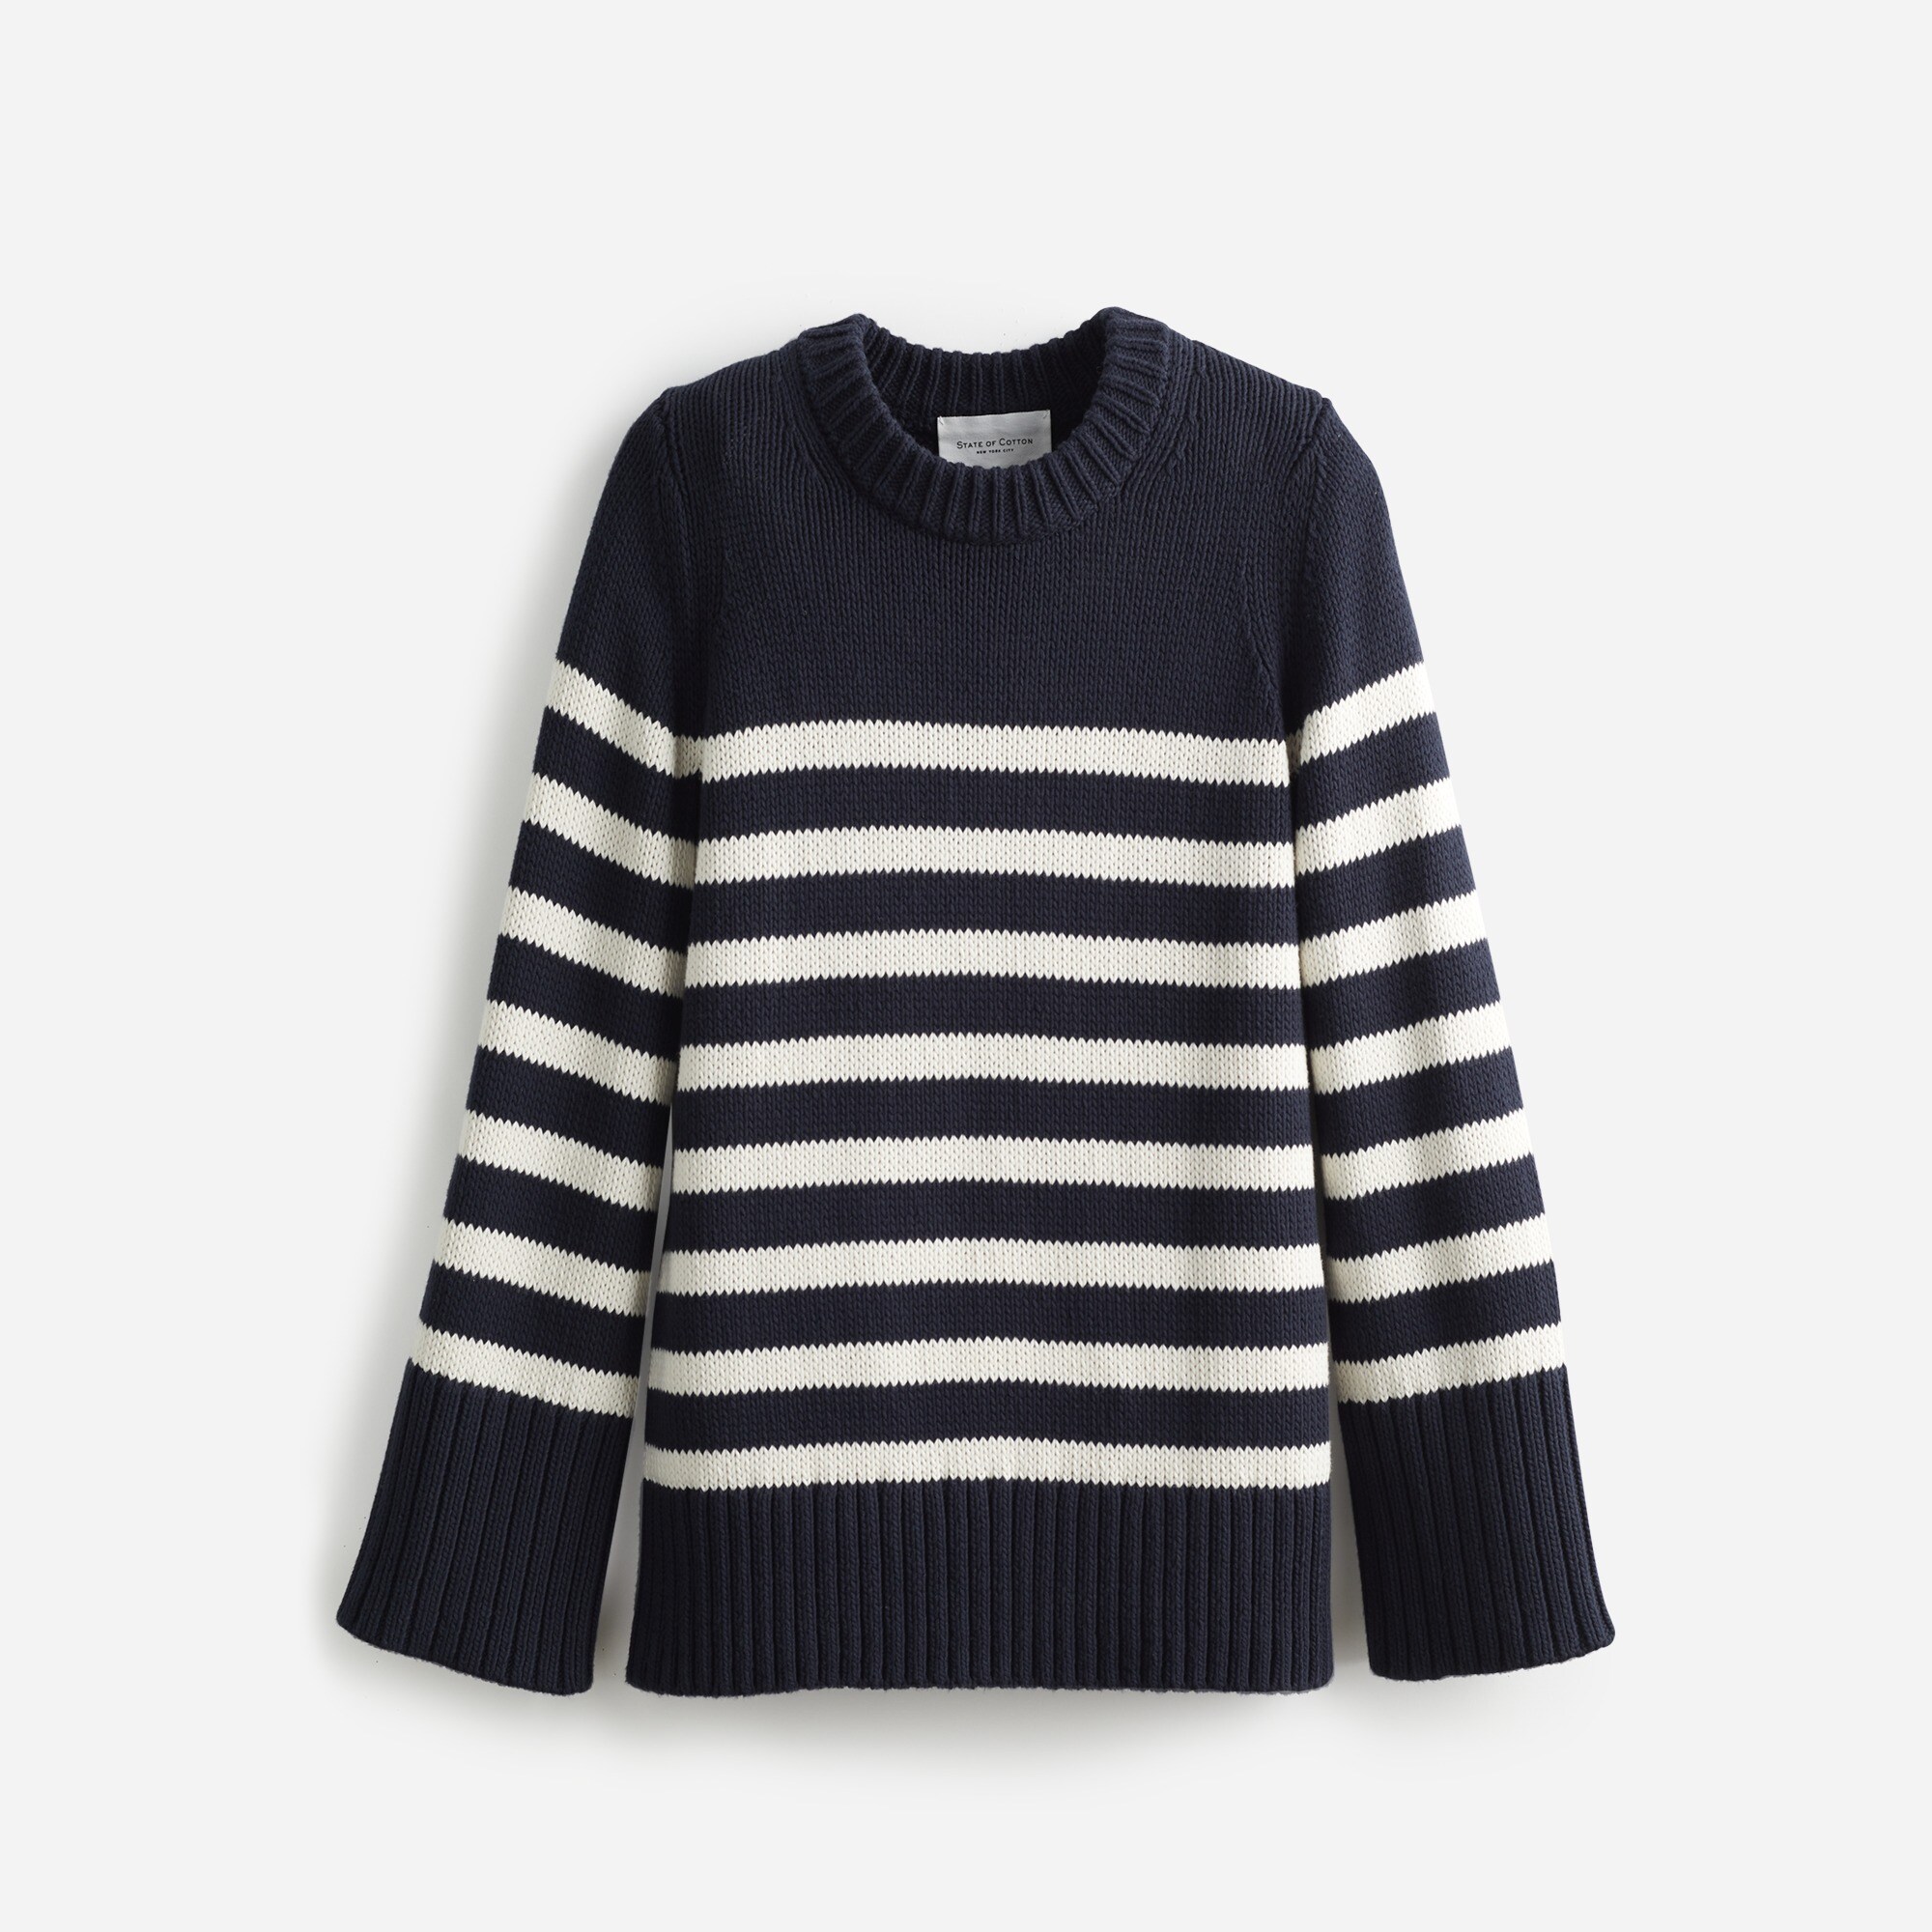 State of Cotton NYC Kittery striped sweater